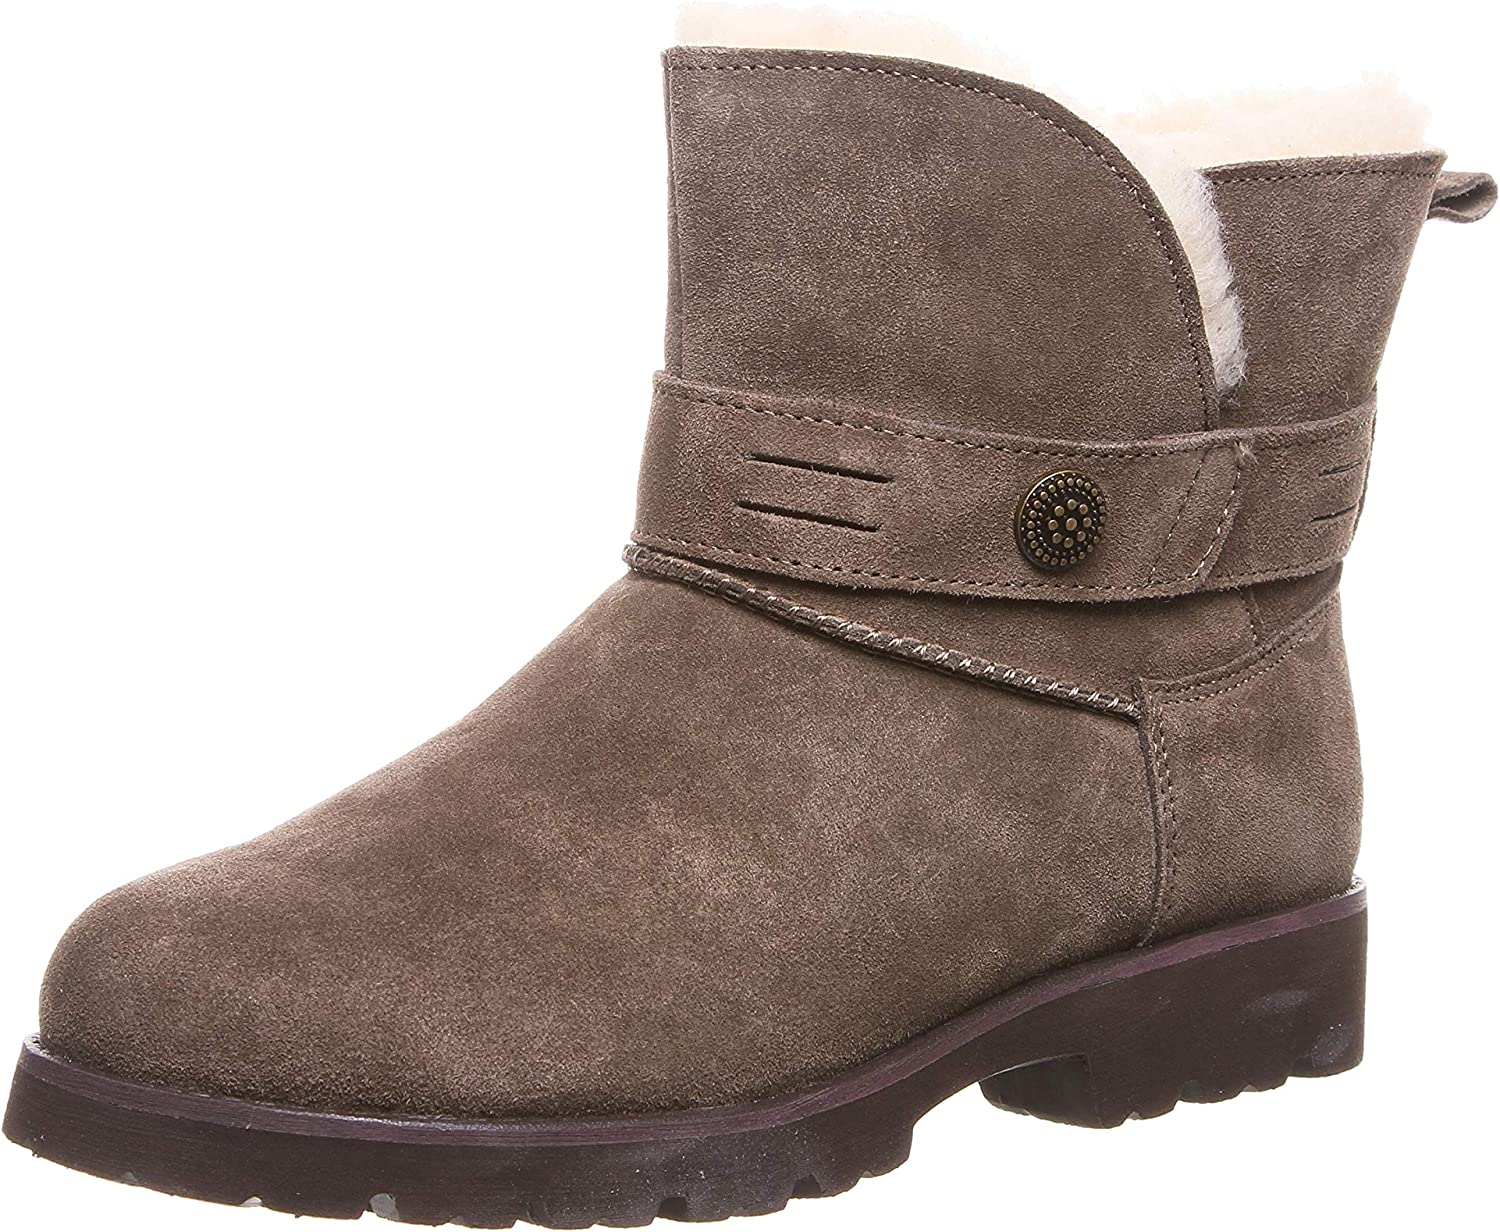 BEARPAW Womens Wellston Suede Slip On Ankle Boots - Seal Brown - 6